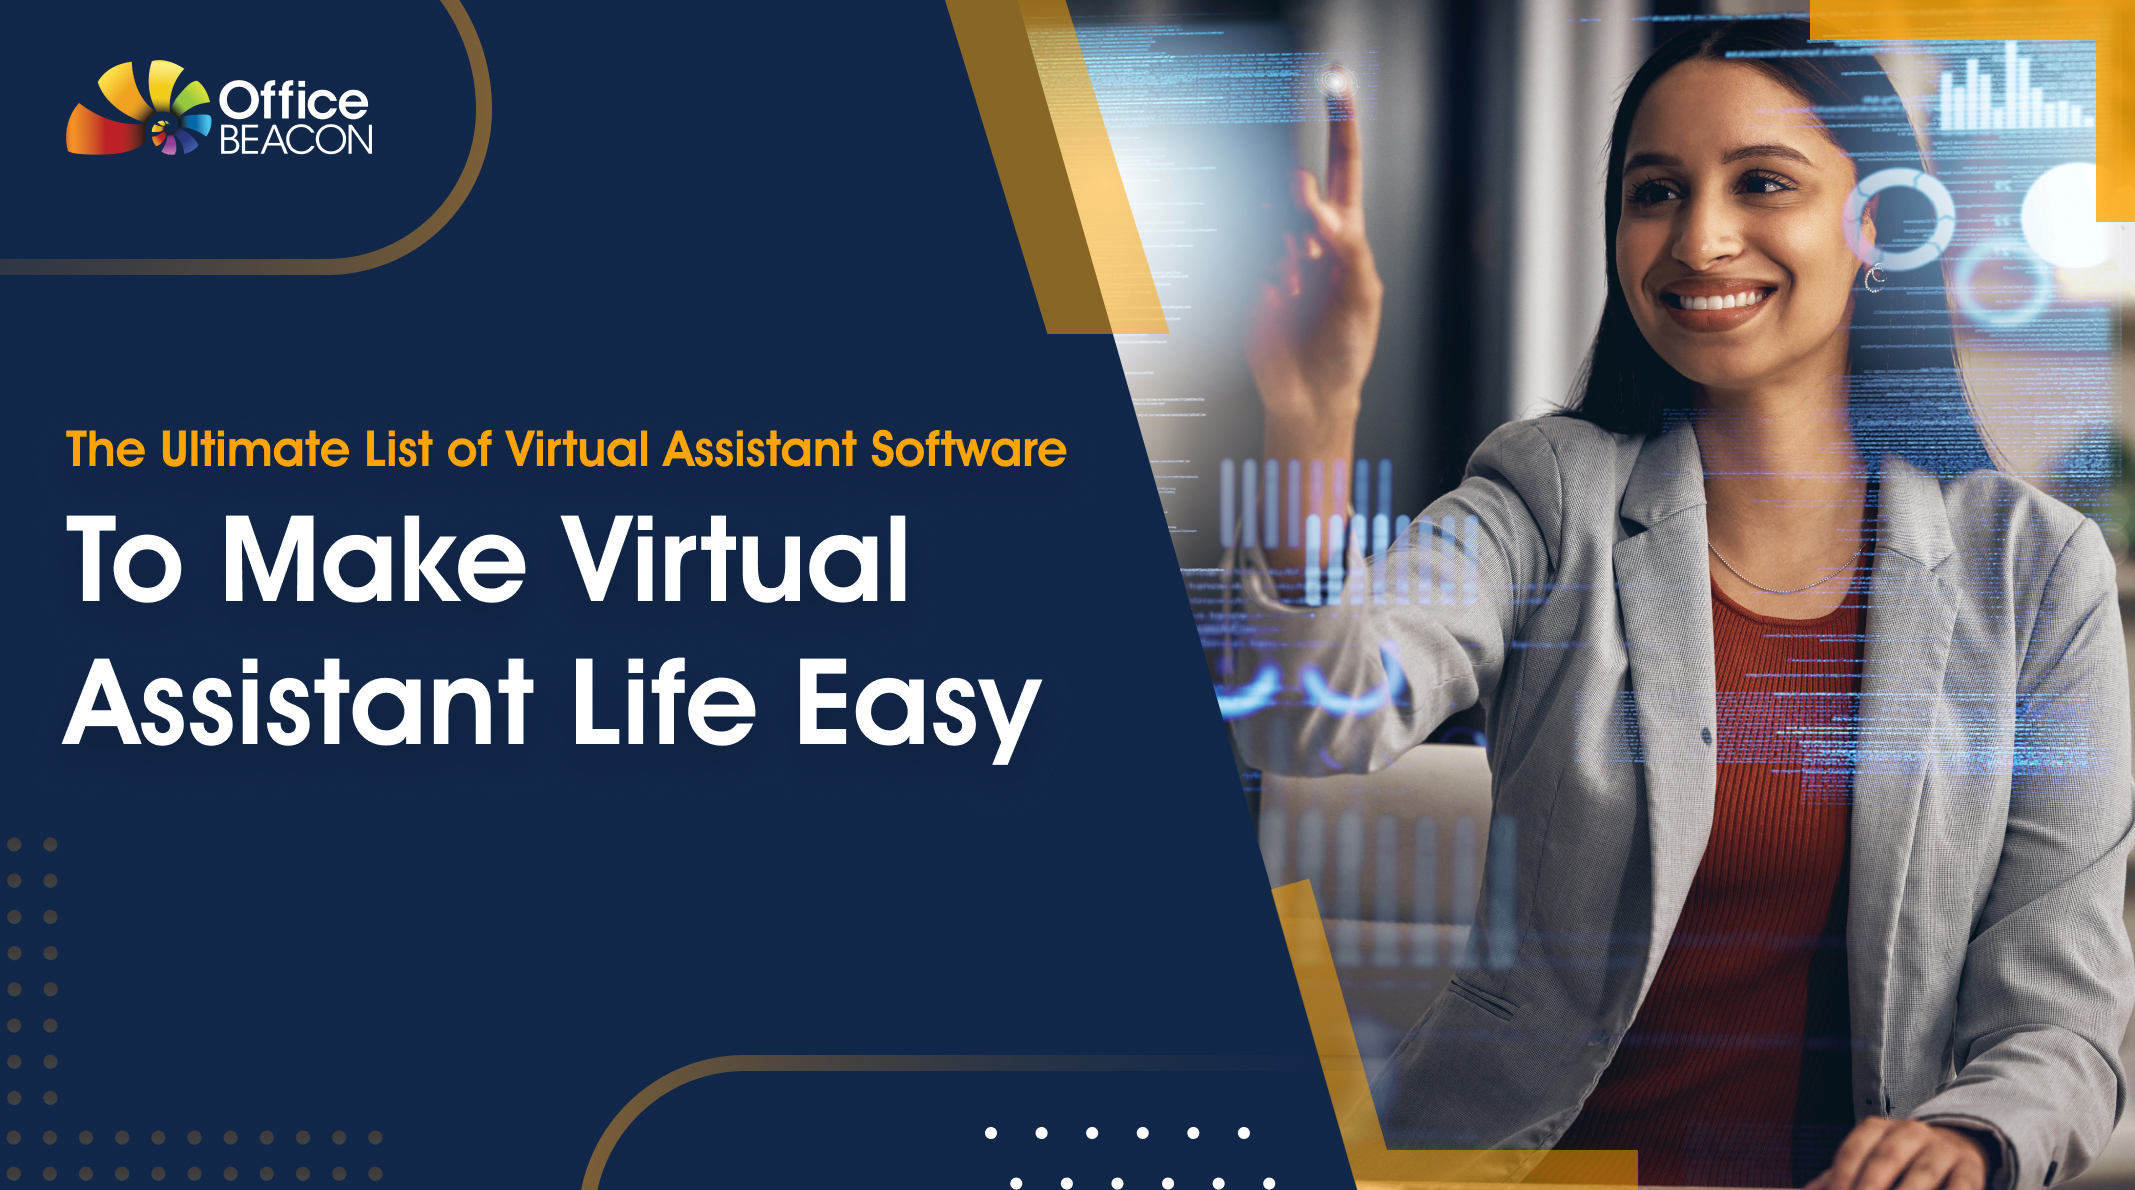 The Ultimate List of Virtual Assistant Software To Make Virtual Assistant Life Easy